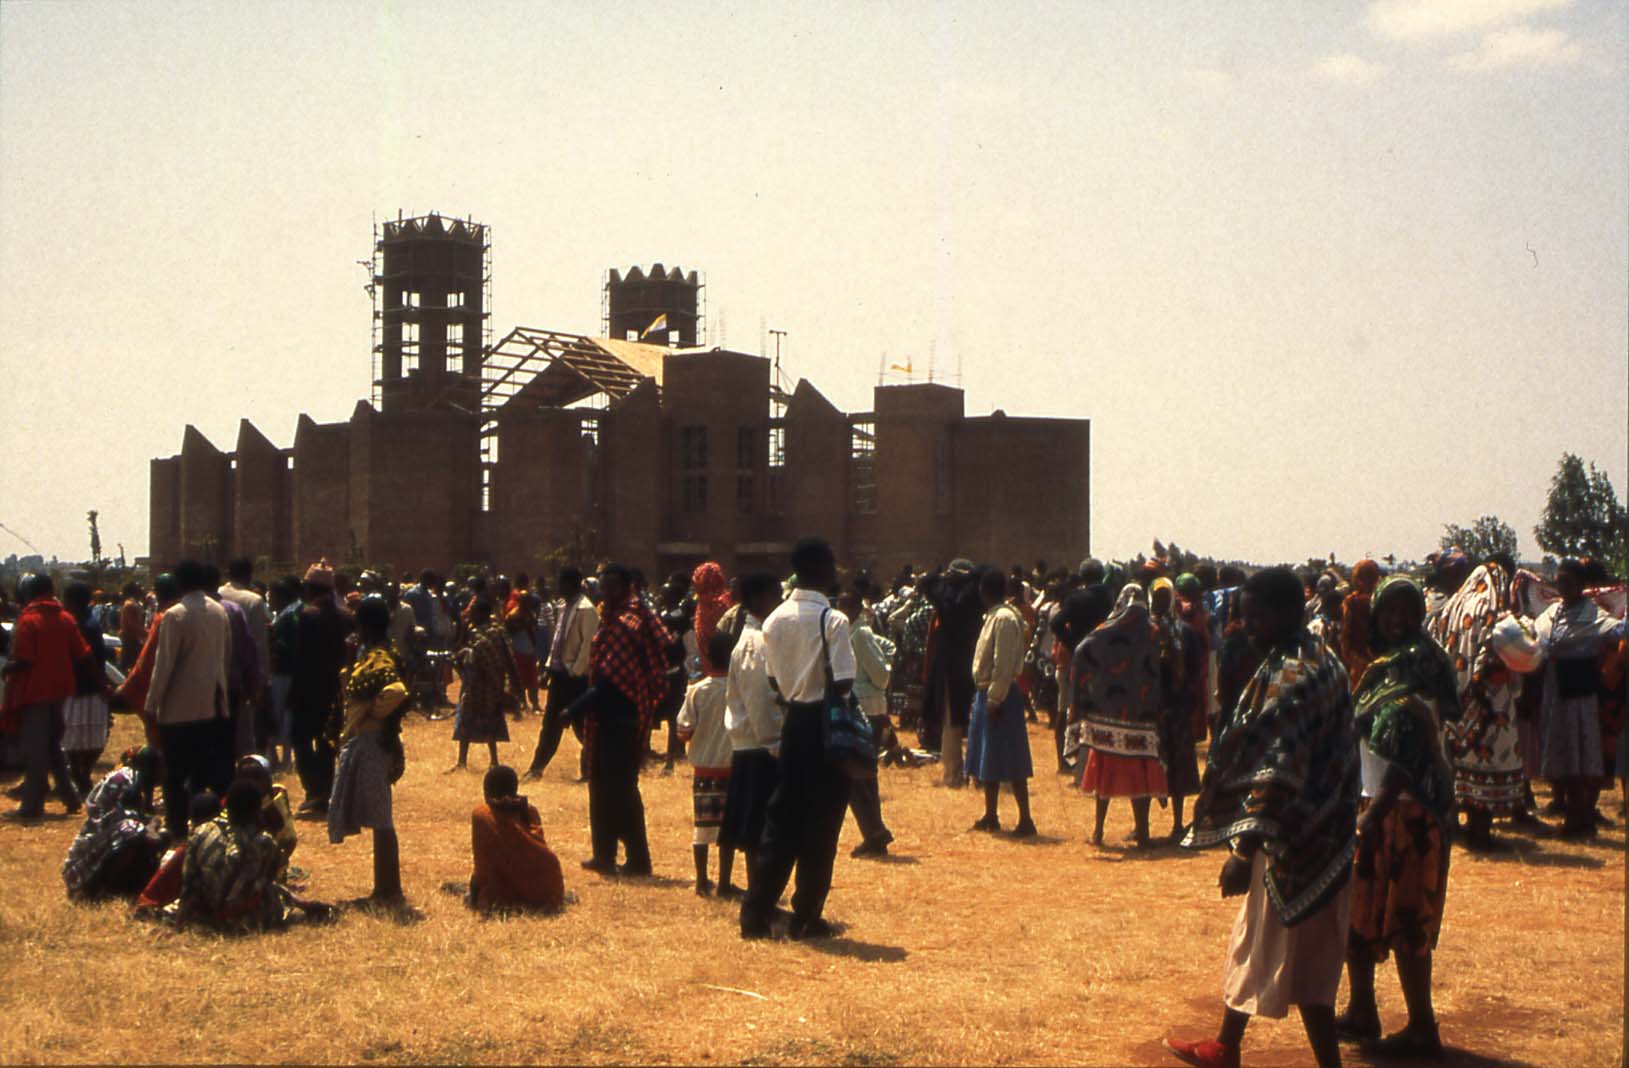 The building of the new cathedral, the 4th largest in Africa